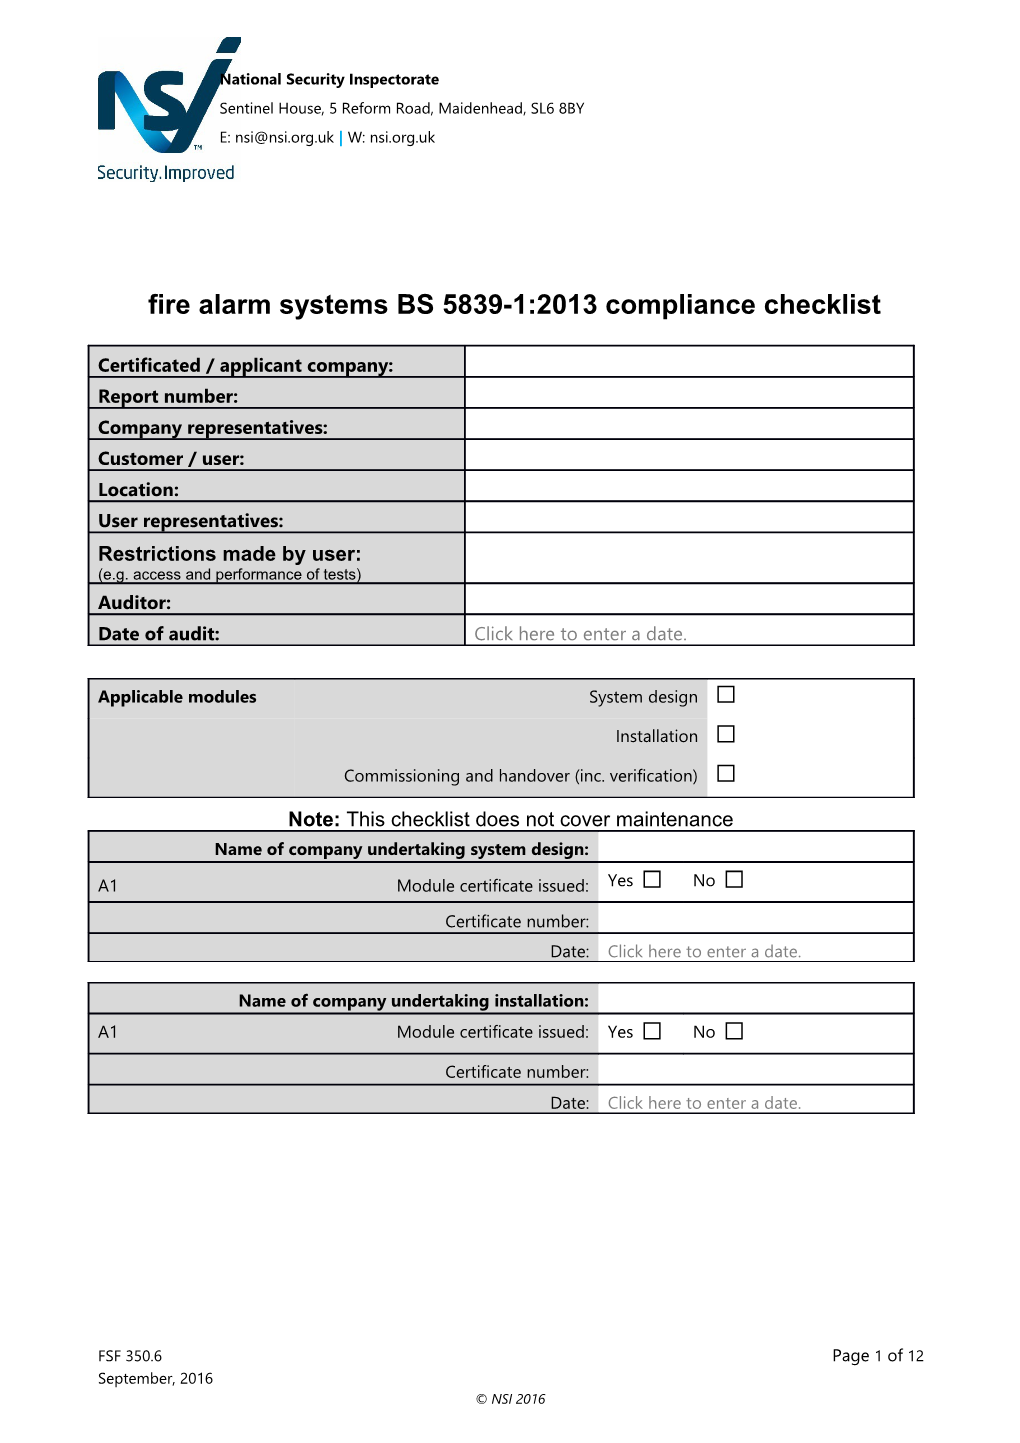 Fire Detection & Fire Alarm Systems BS 5839-1:2013 Compliance Checklist